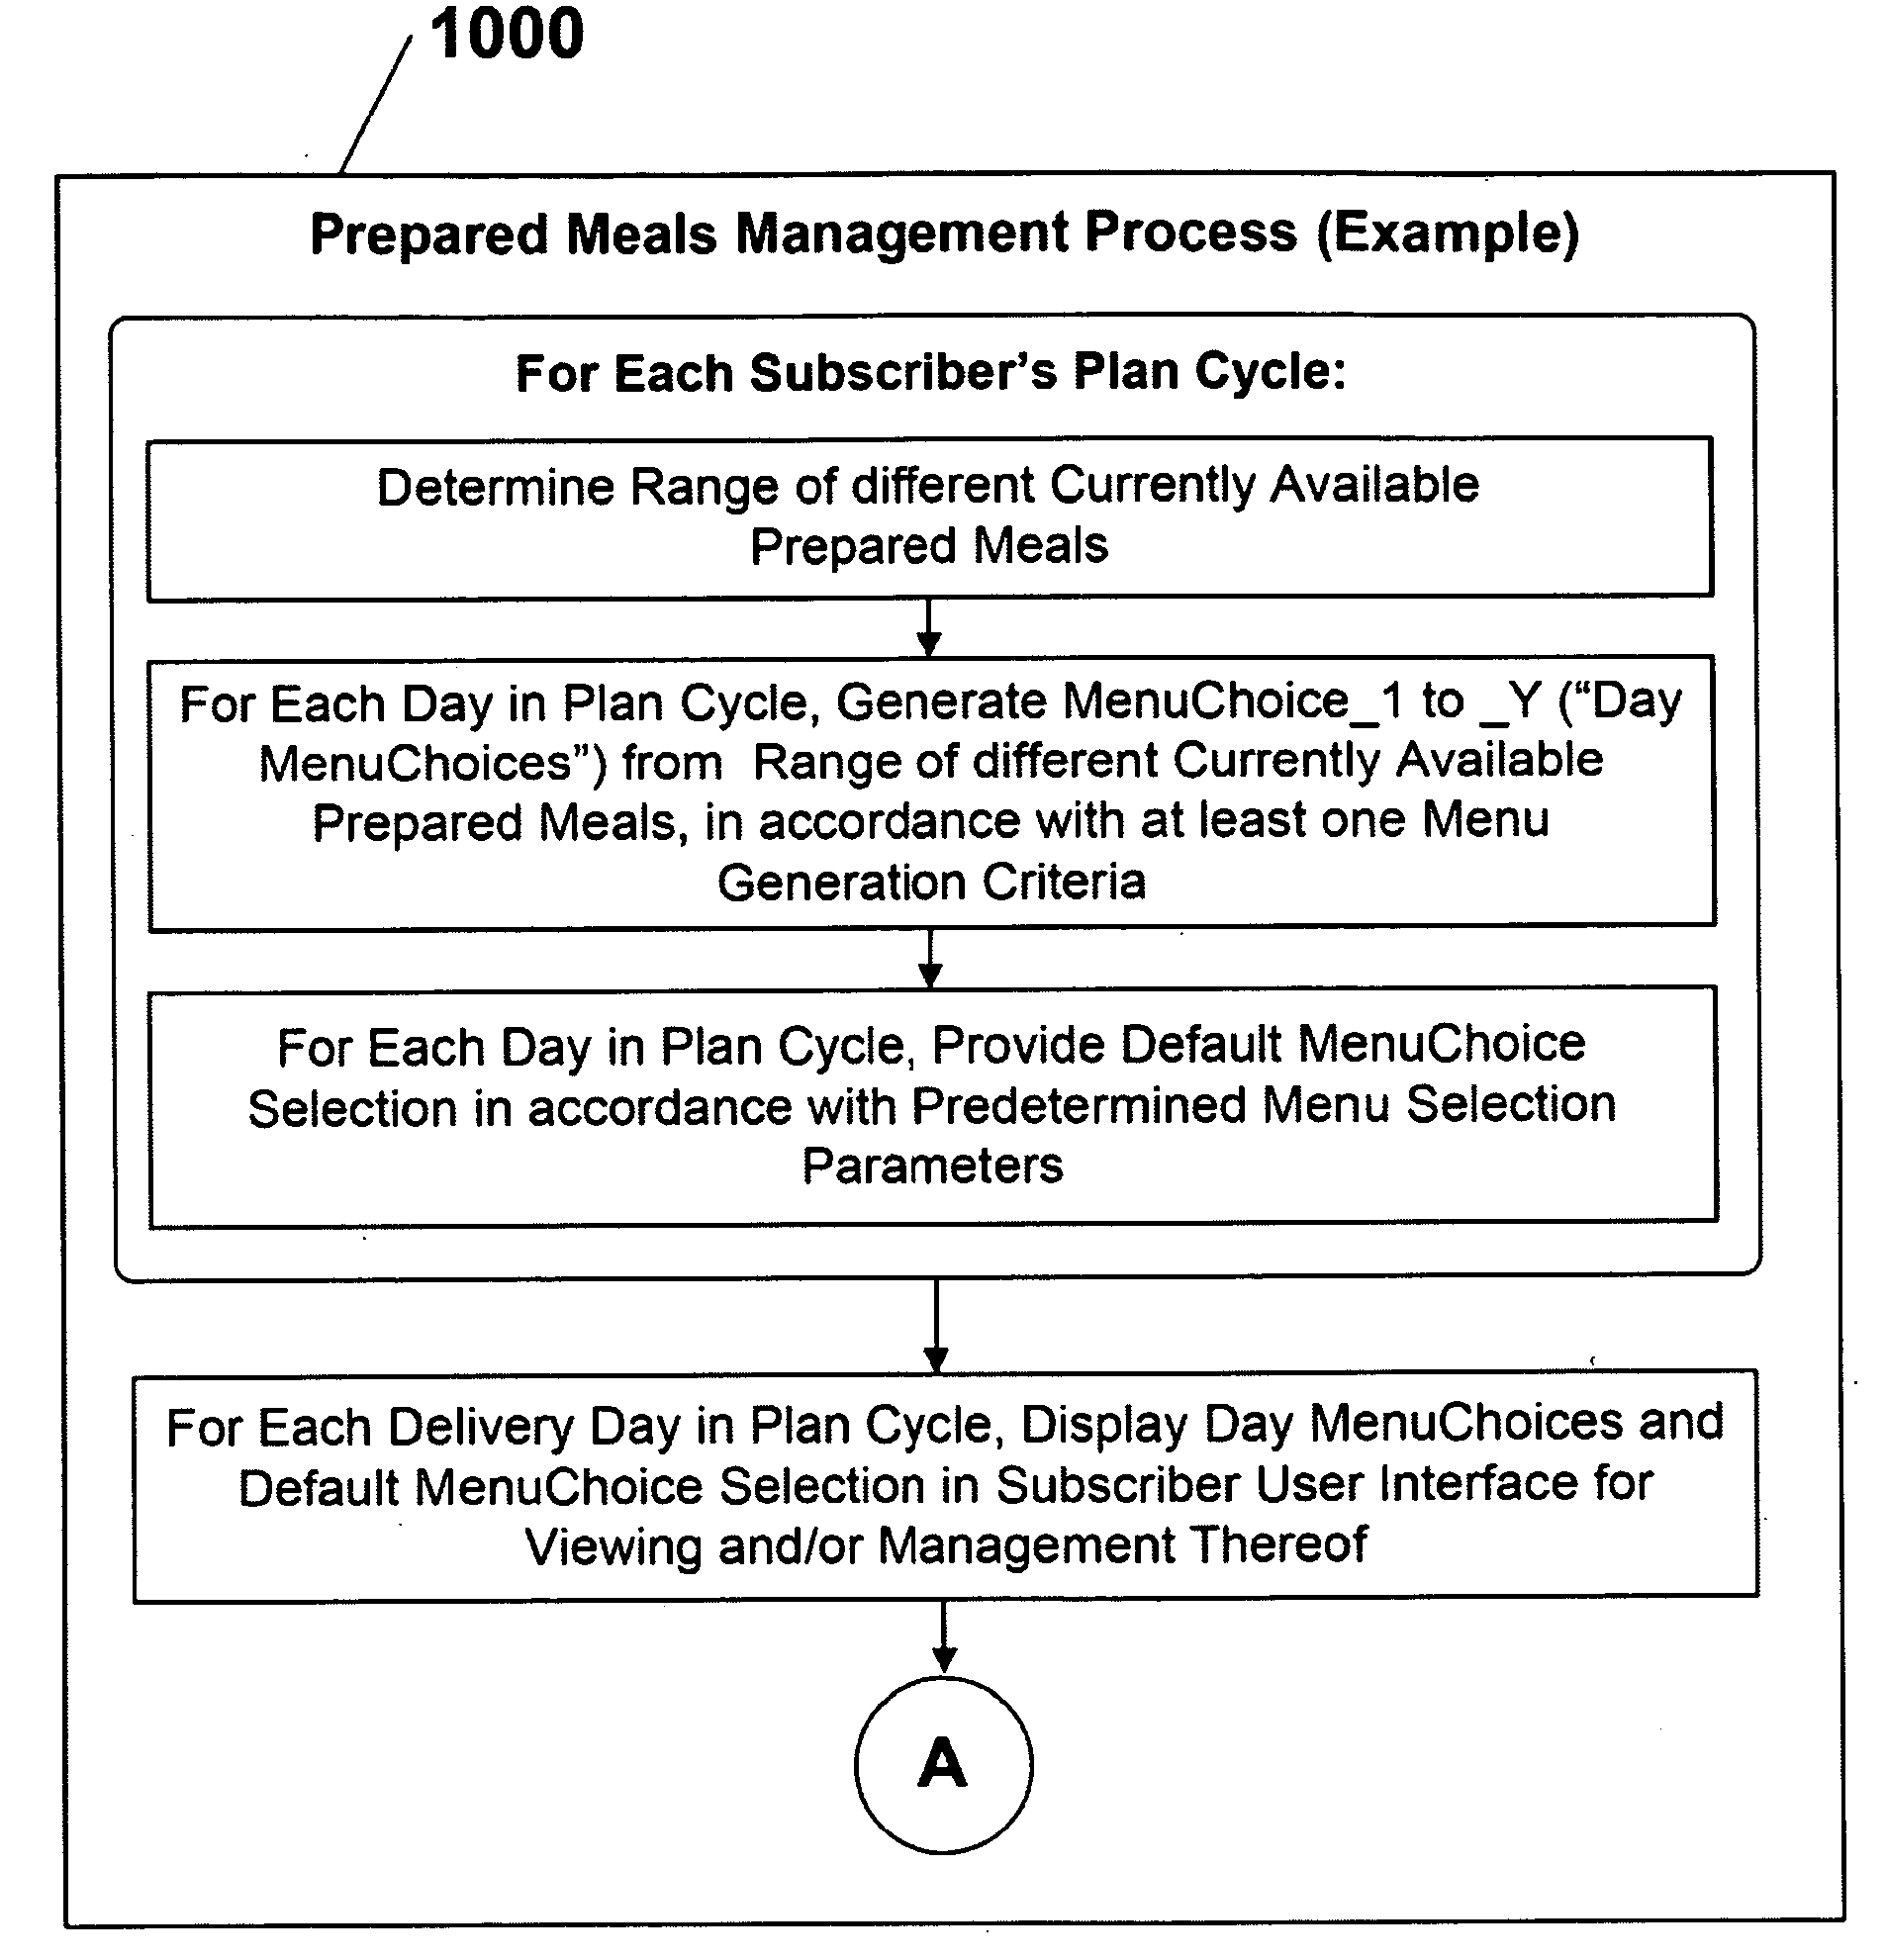 System and method for enabling selective customer participation in dynamically configuring and managing at least a portion of customizable individualized victuals provision services provided thereto